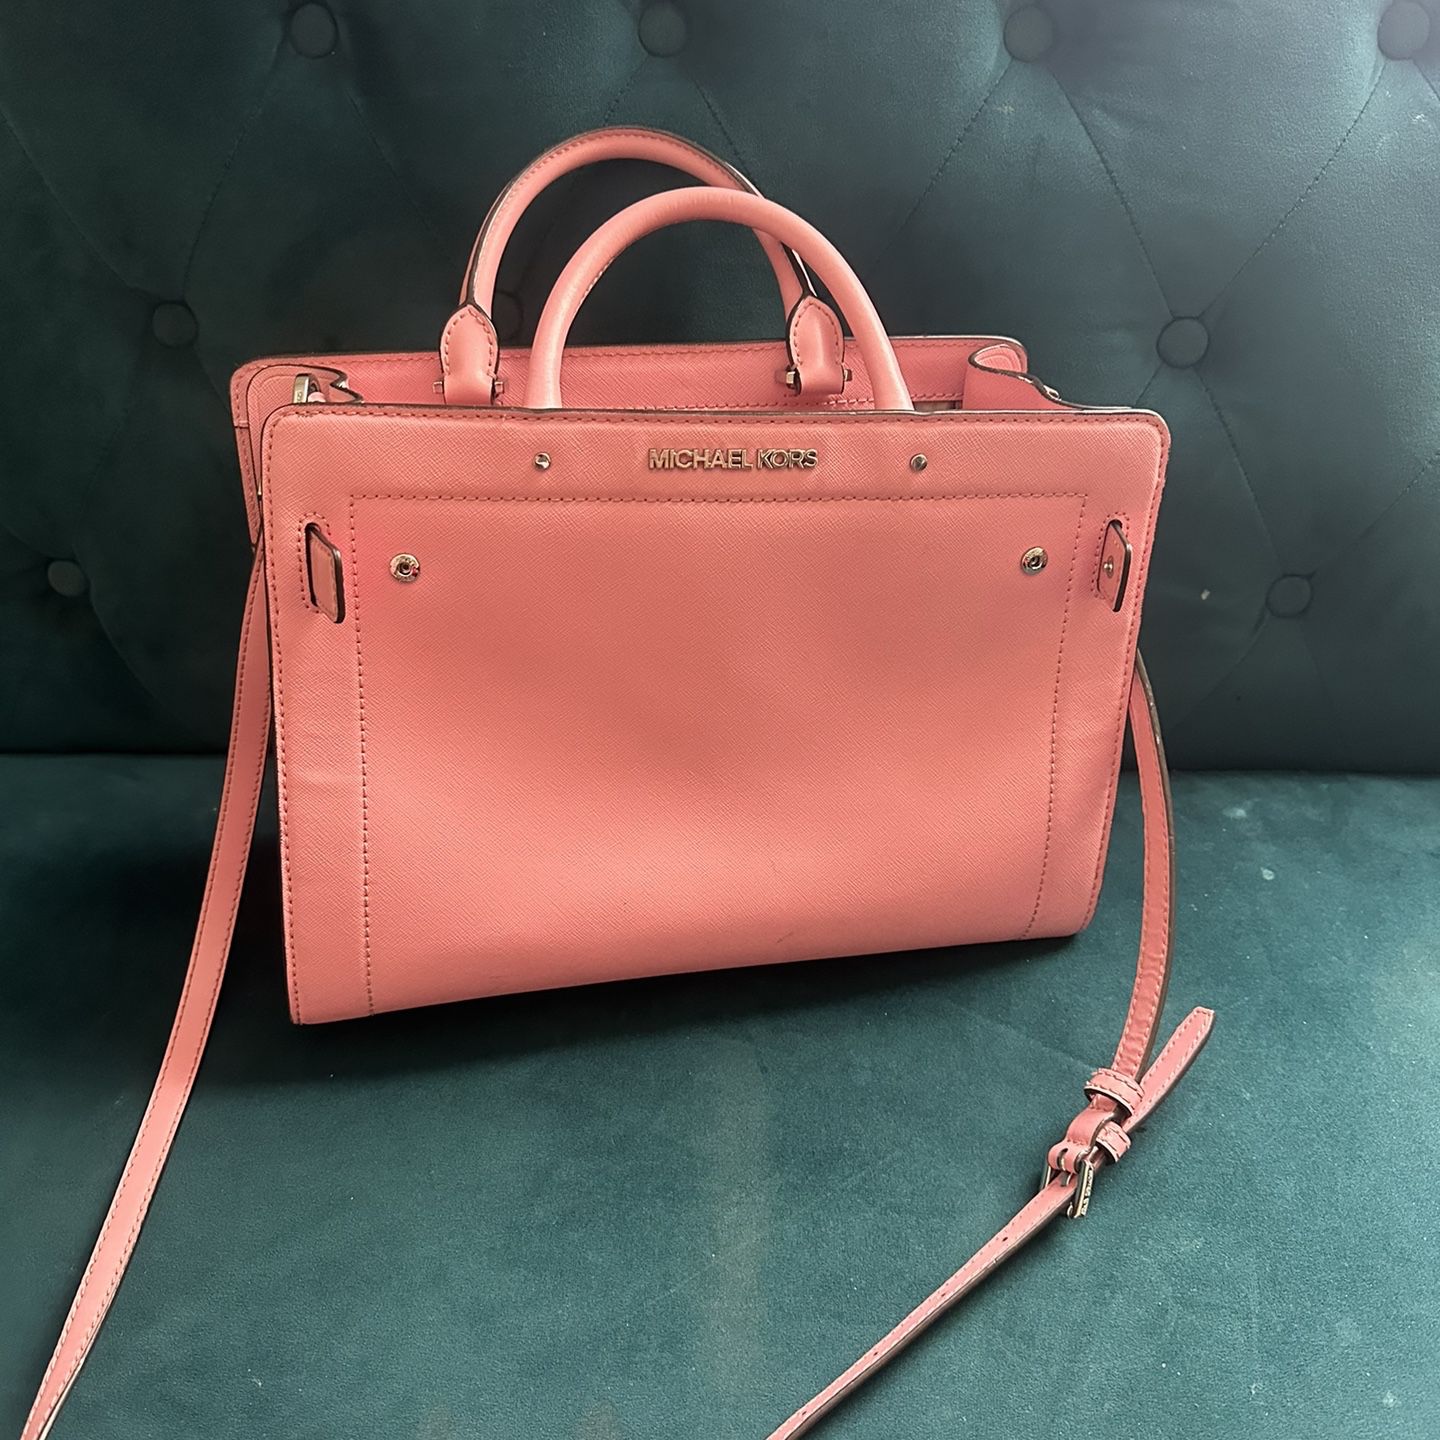 Hot pink Michael Kors bag with gold hardware. Mint condition.